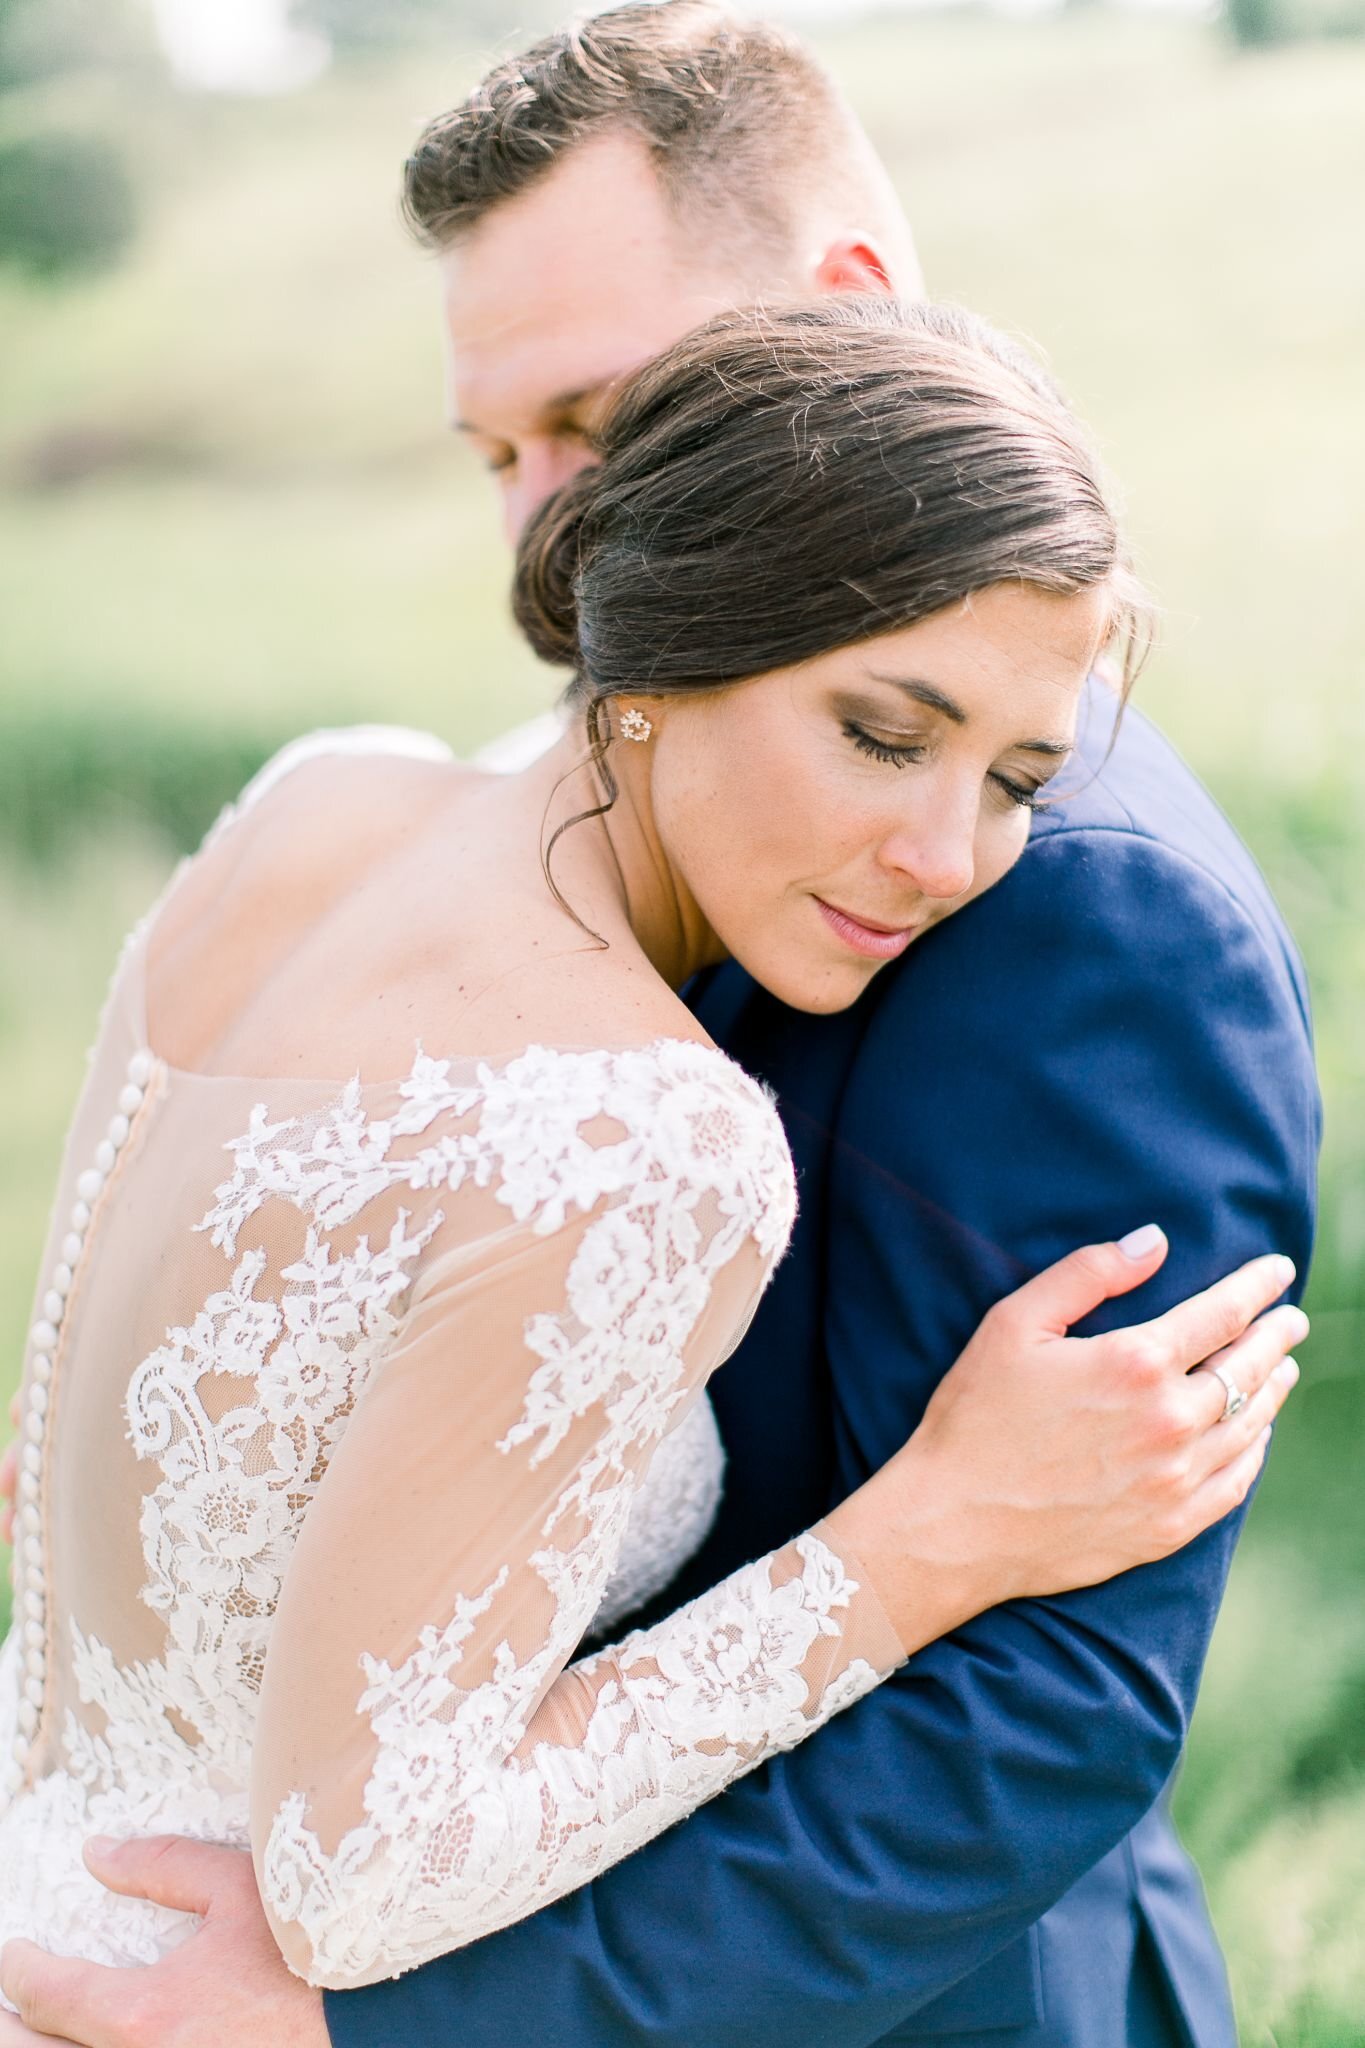 Airy wedding portrait of a bride and groom embracing at an outdoor wedding in Maine